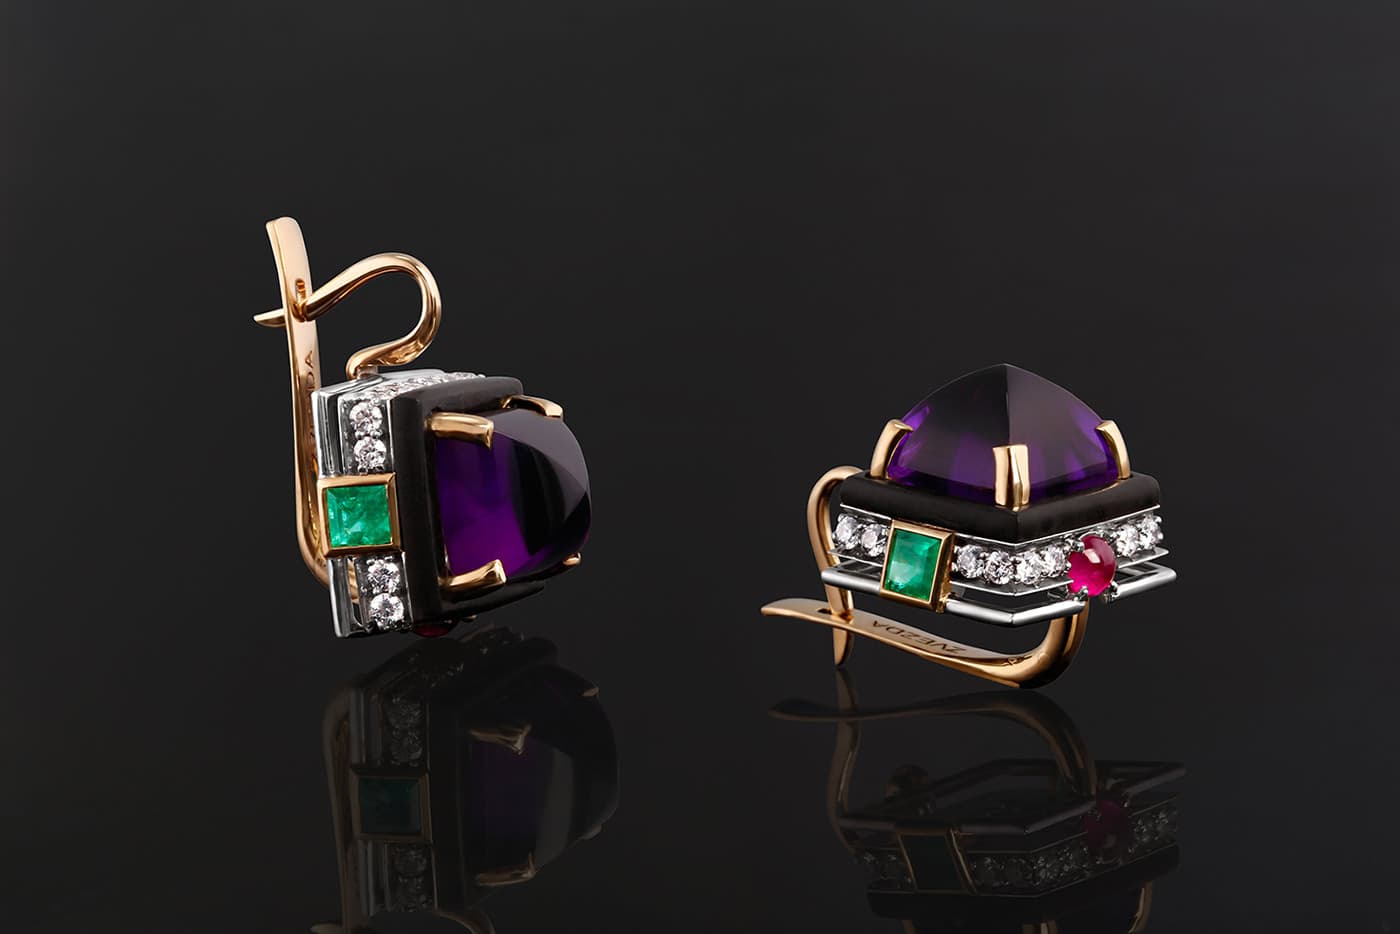 MiLiO earrings in 18K gold with amethysts, emeralds, rubies and diamonds